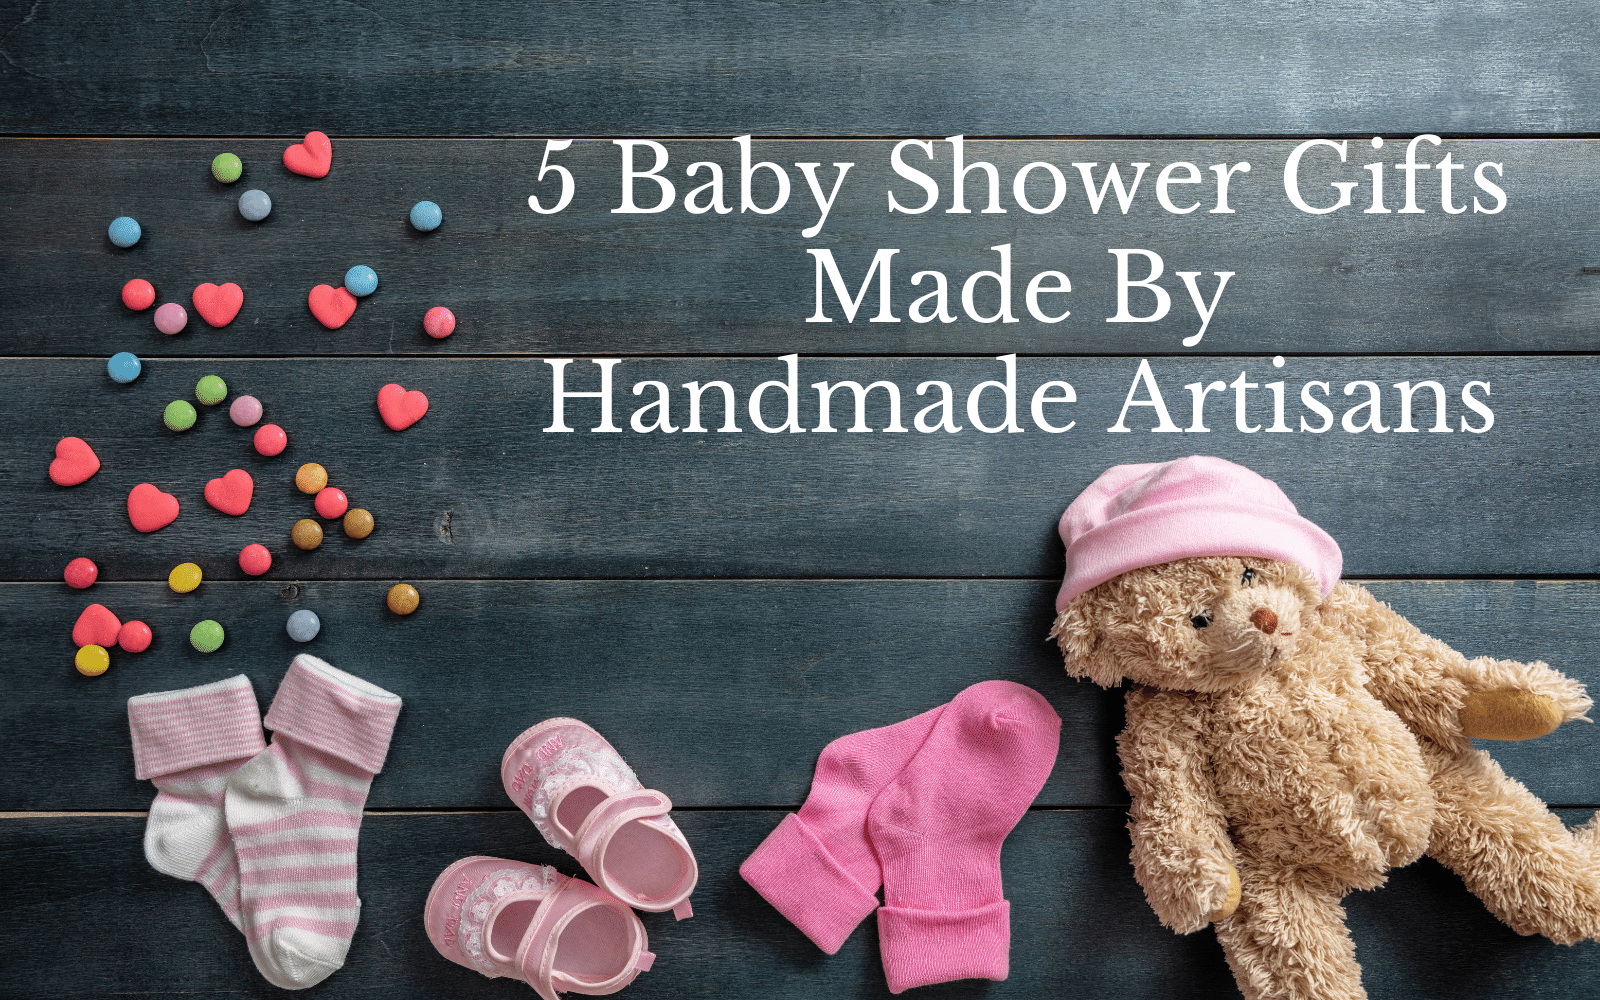 5 Baby Shower Gifts Made By Handmade Artisans | Sew Happy Quilting | Quilts for Sale